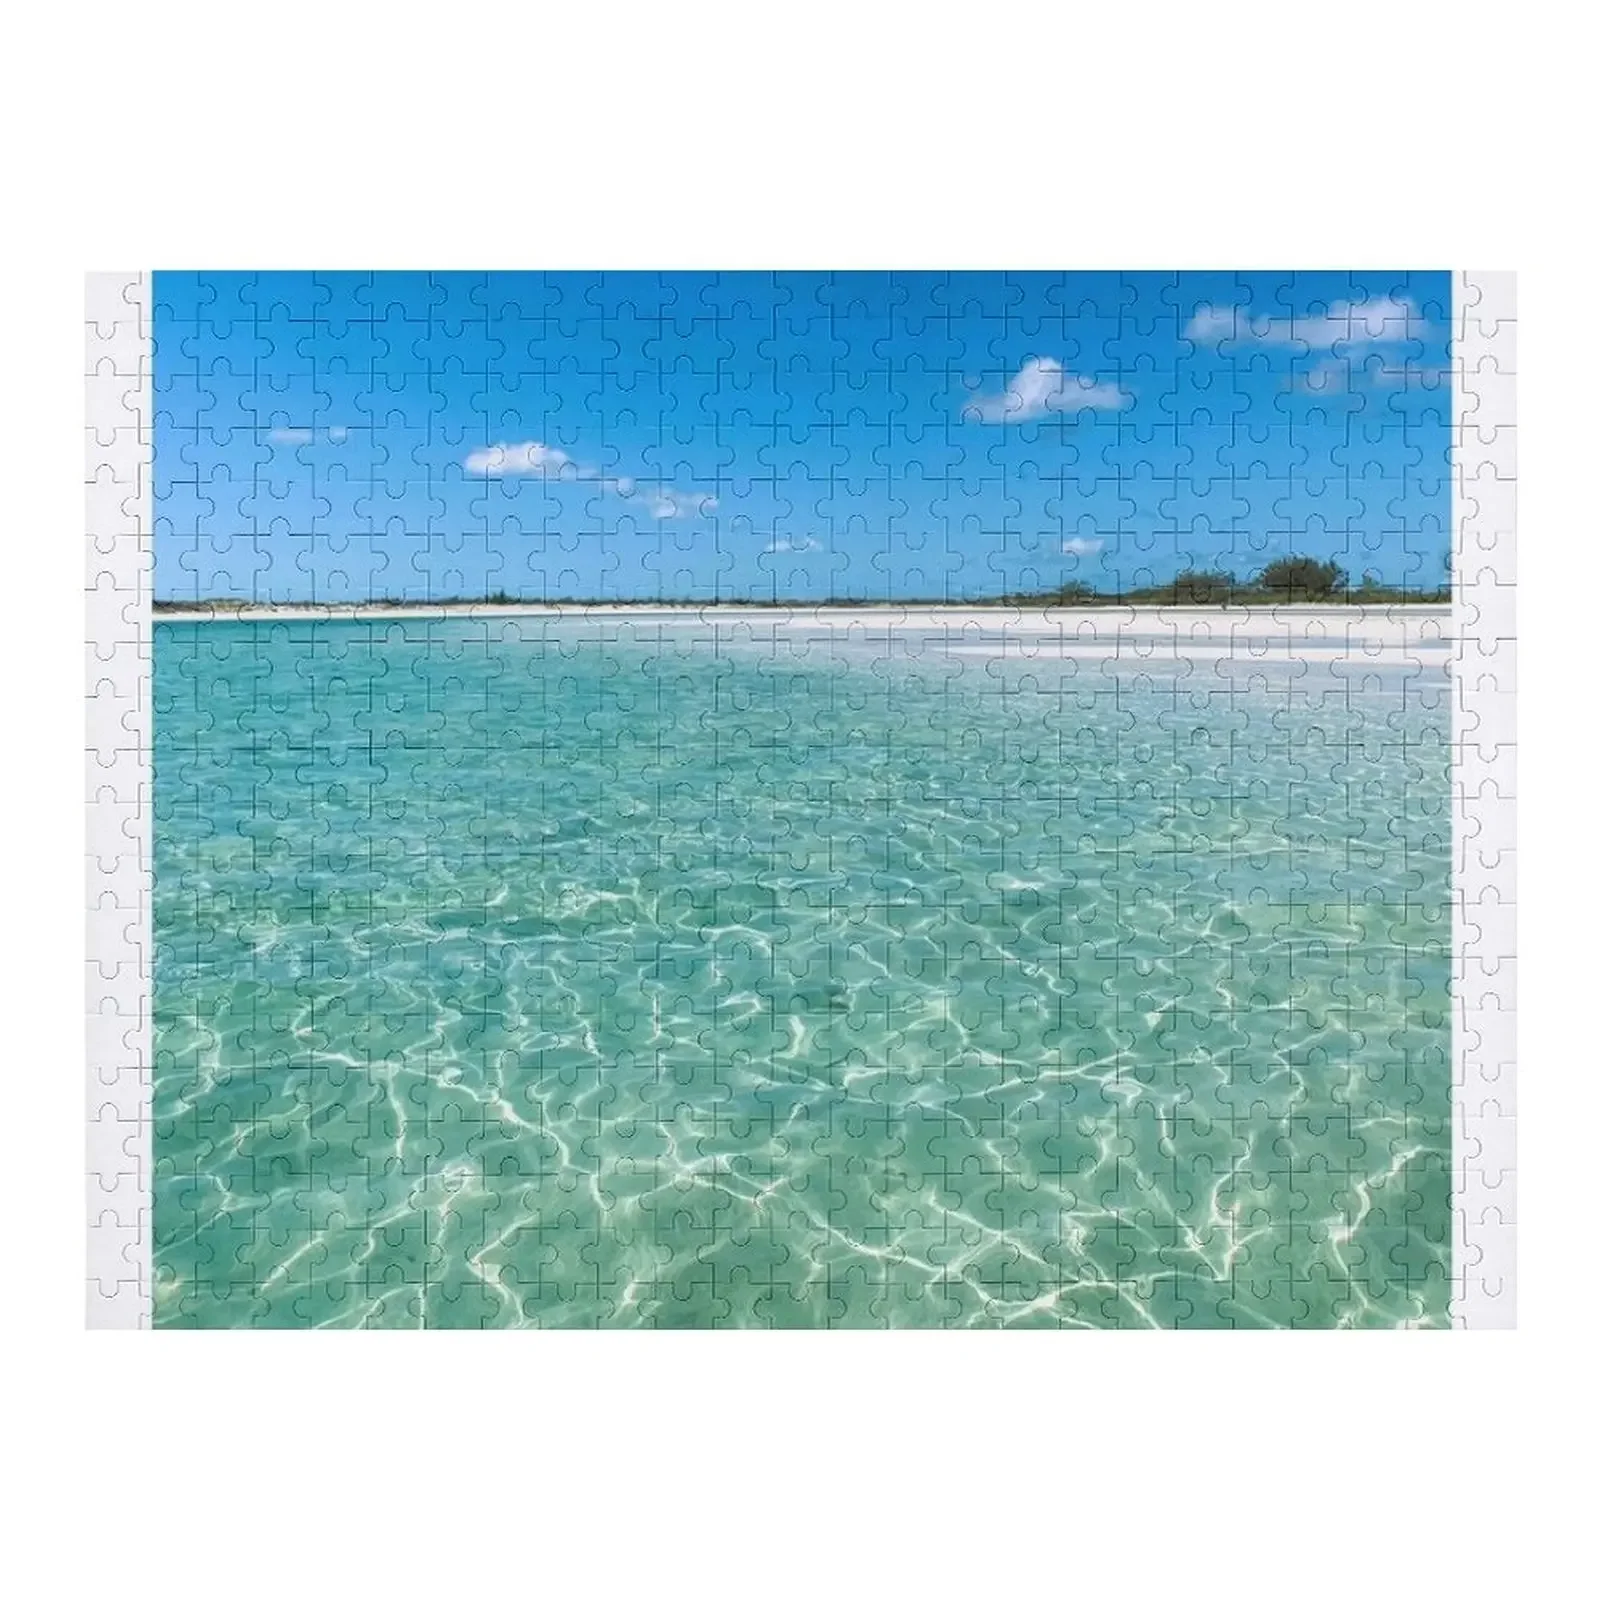 

Beautiful Marble Pattern Ocean Nature Landscape of Turks & Caicos Jigsaw Puzzle Personalized Photo Gift Christmas Toys Puzzle